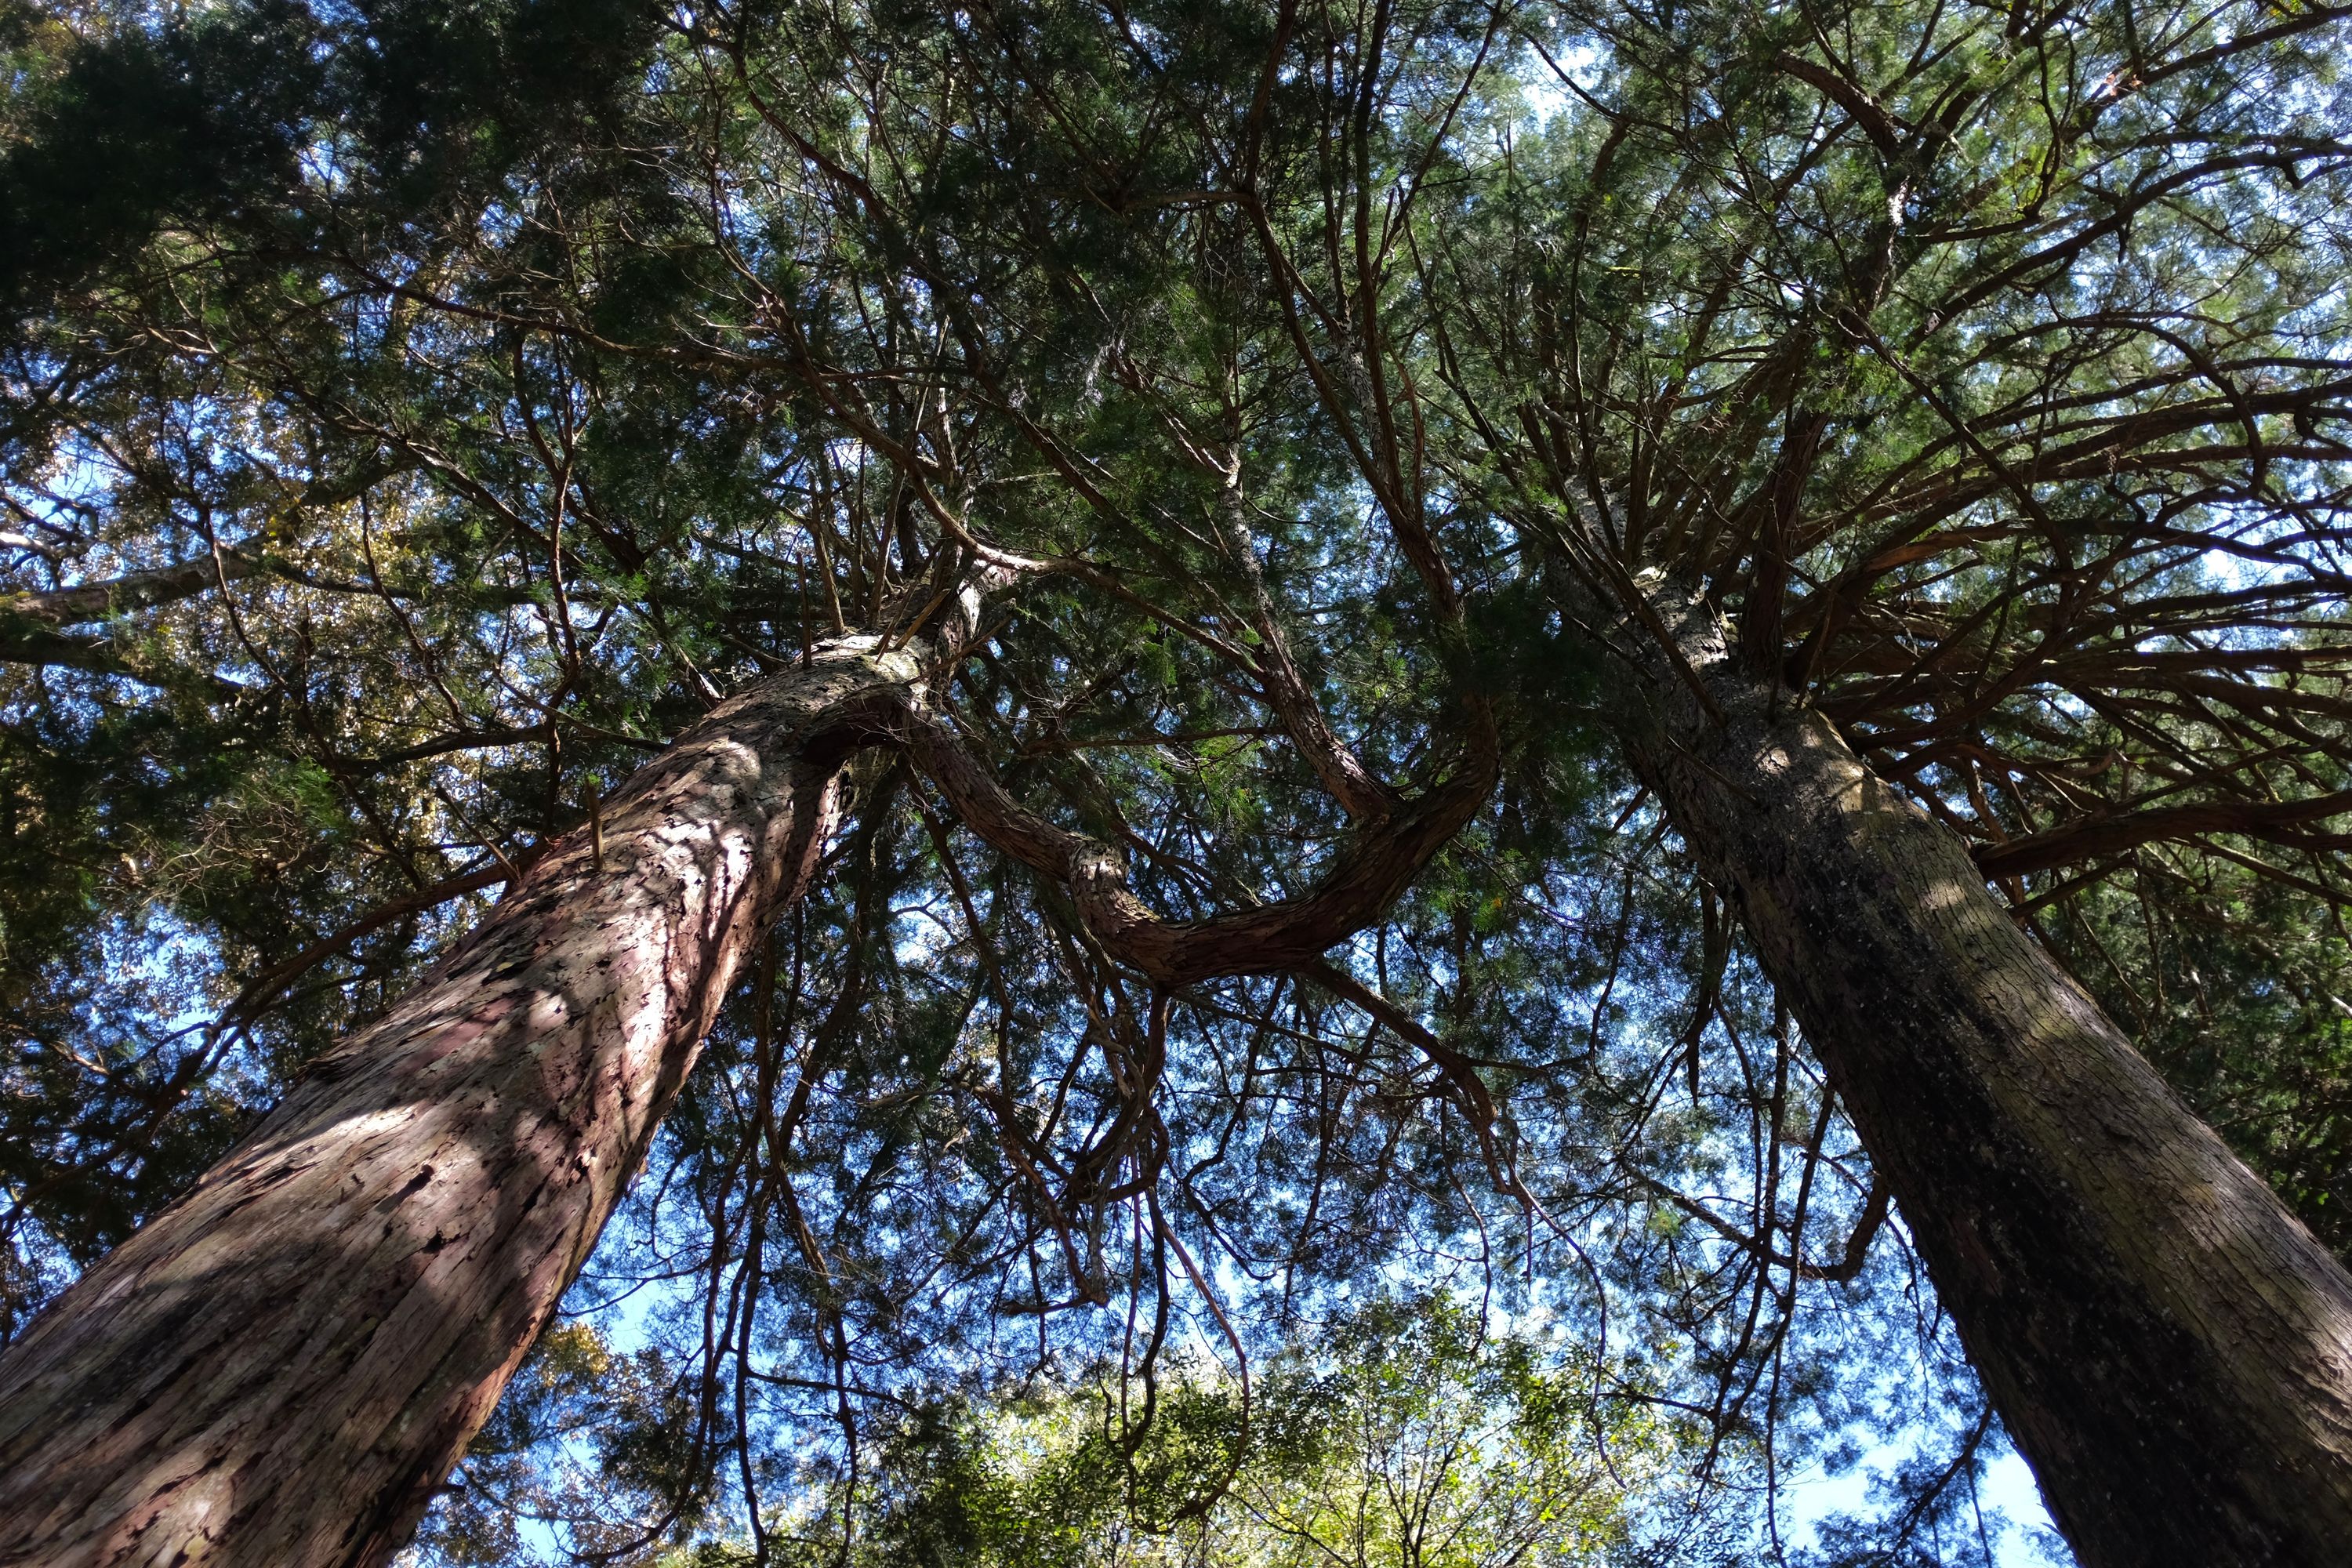 Looking up at two cedars whose branches are fused together.